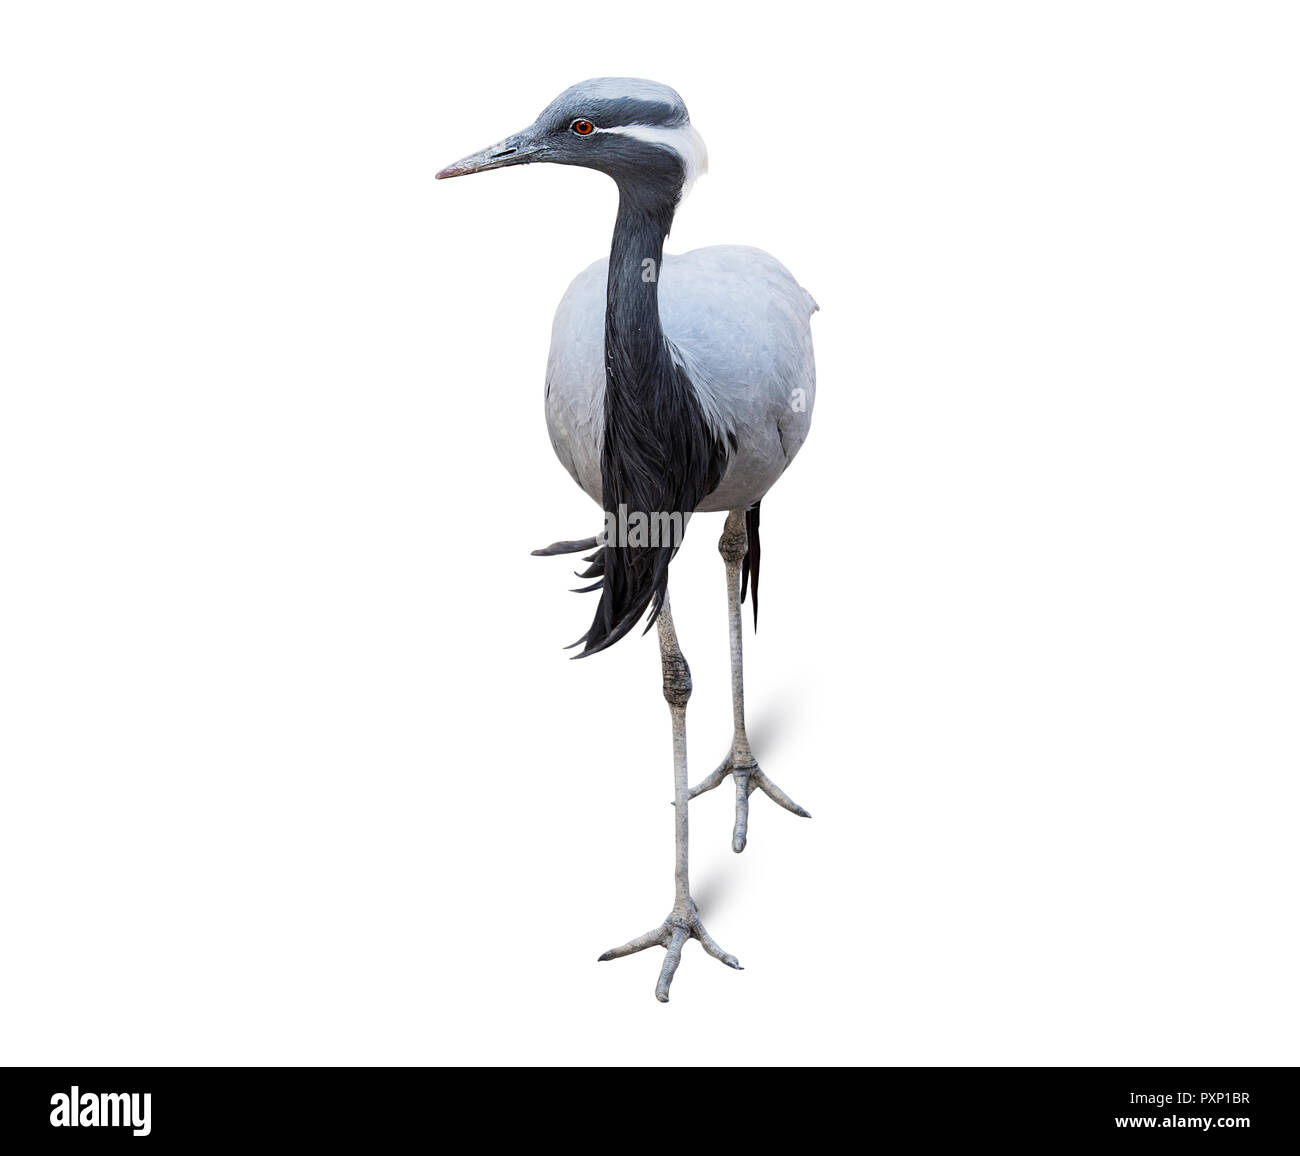 Heron isolated on white background, a large fish-eating wading bird with long legs, a long S-shaped neck, and a long pointed bill Stock Photo